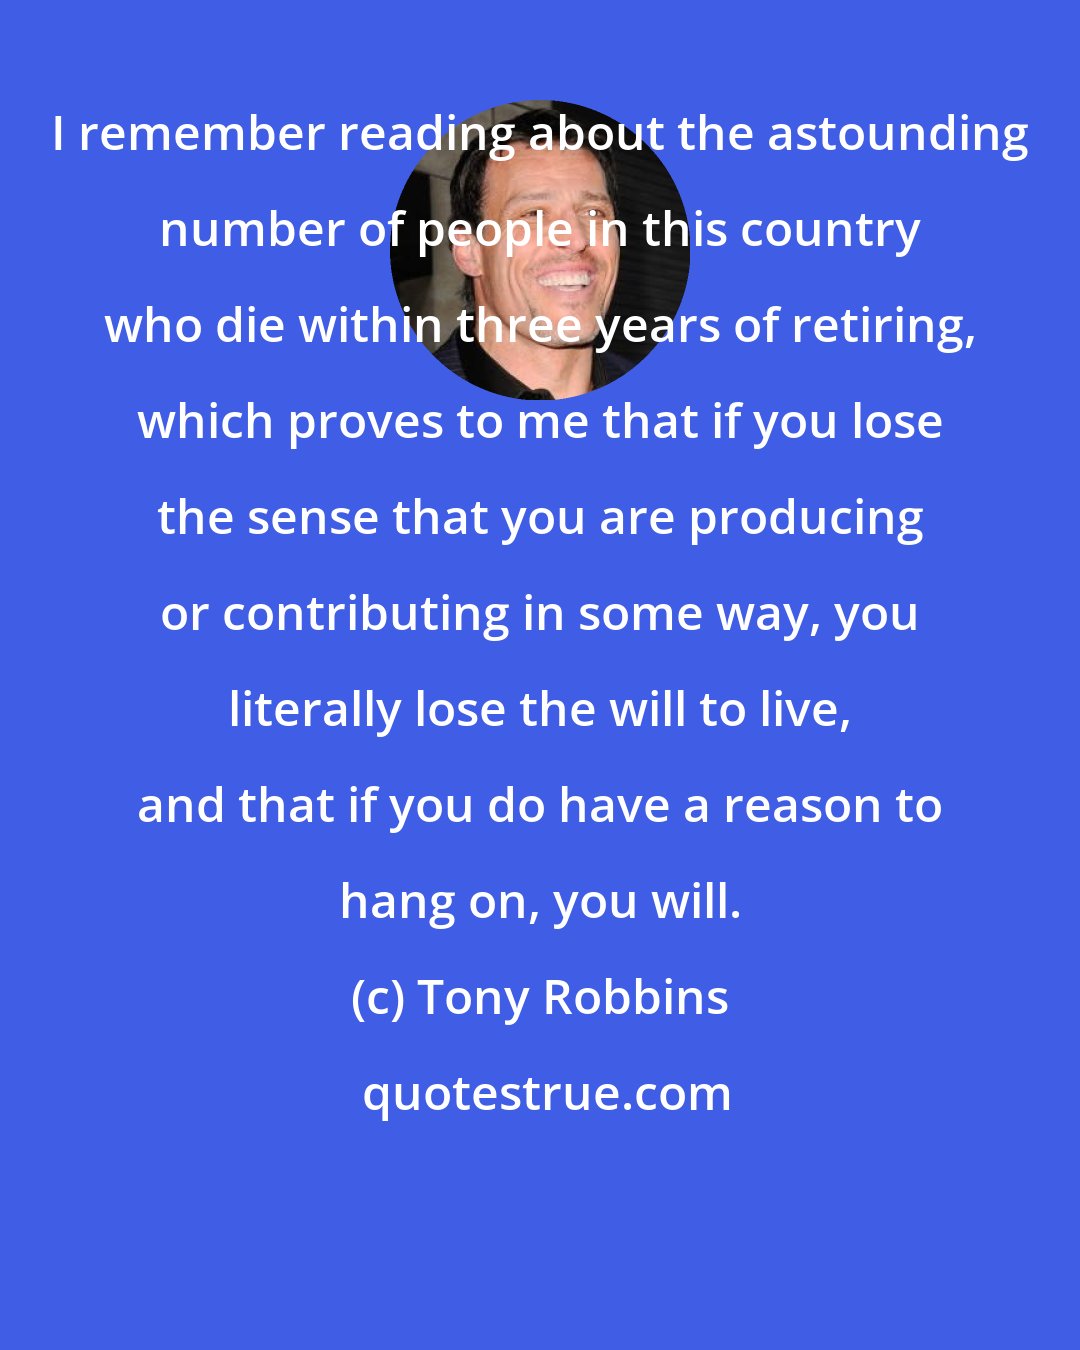 Tony Robbins: I remember reading about the astounding number of people in this country who die within three years of retiring, which proves to me that if you lose the sense that you are producing or contributing in some way, you literally lose the will to live, and that if you do have a reason to hang on, you will.